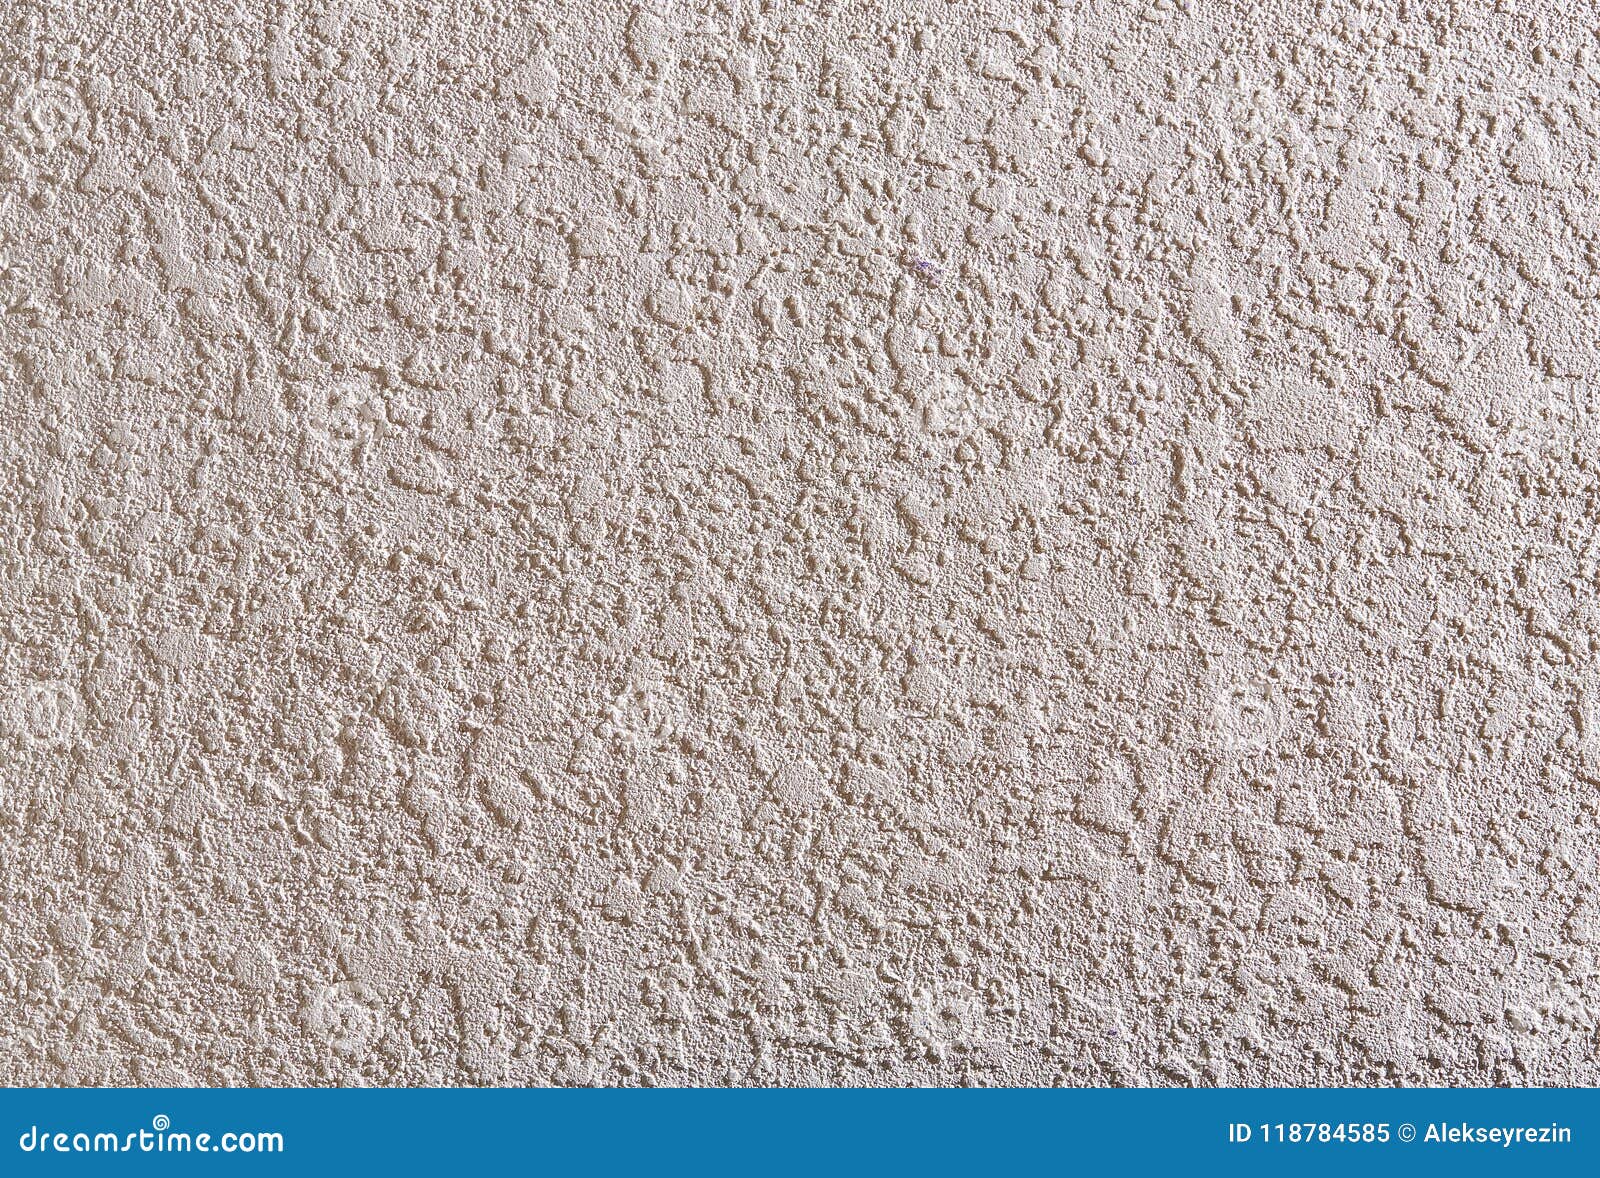 Beige Rough Wall Textured Background Abstact Stucco